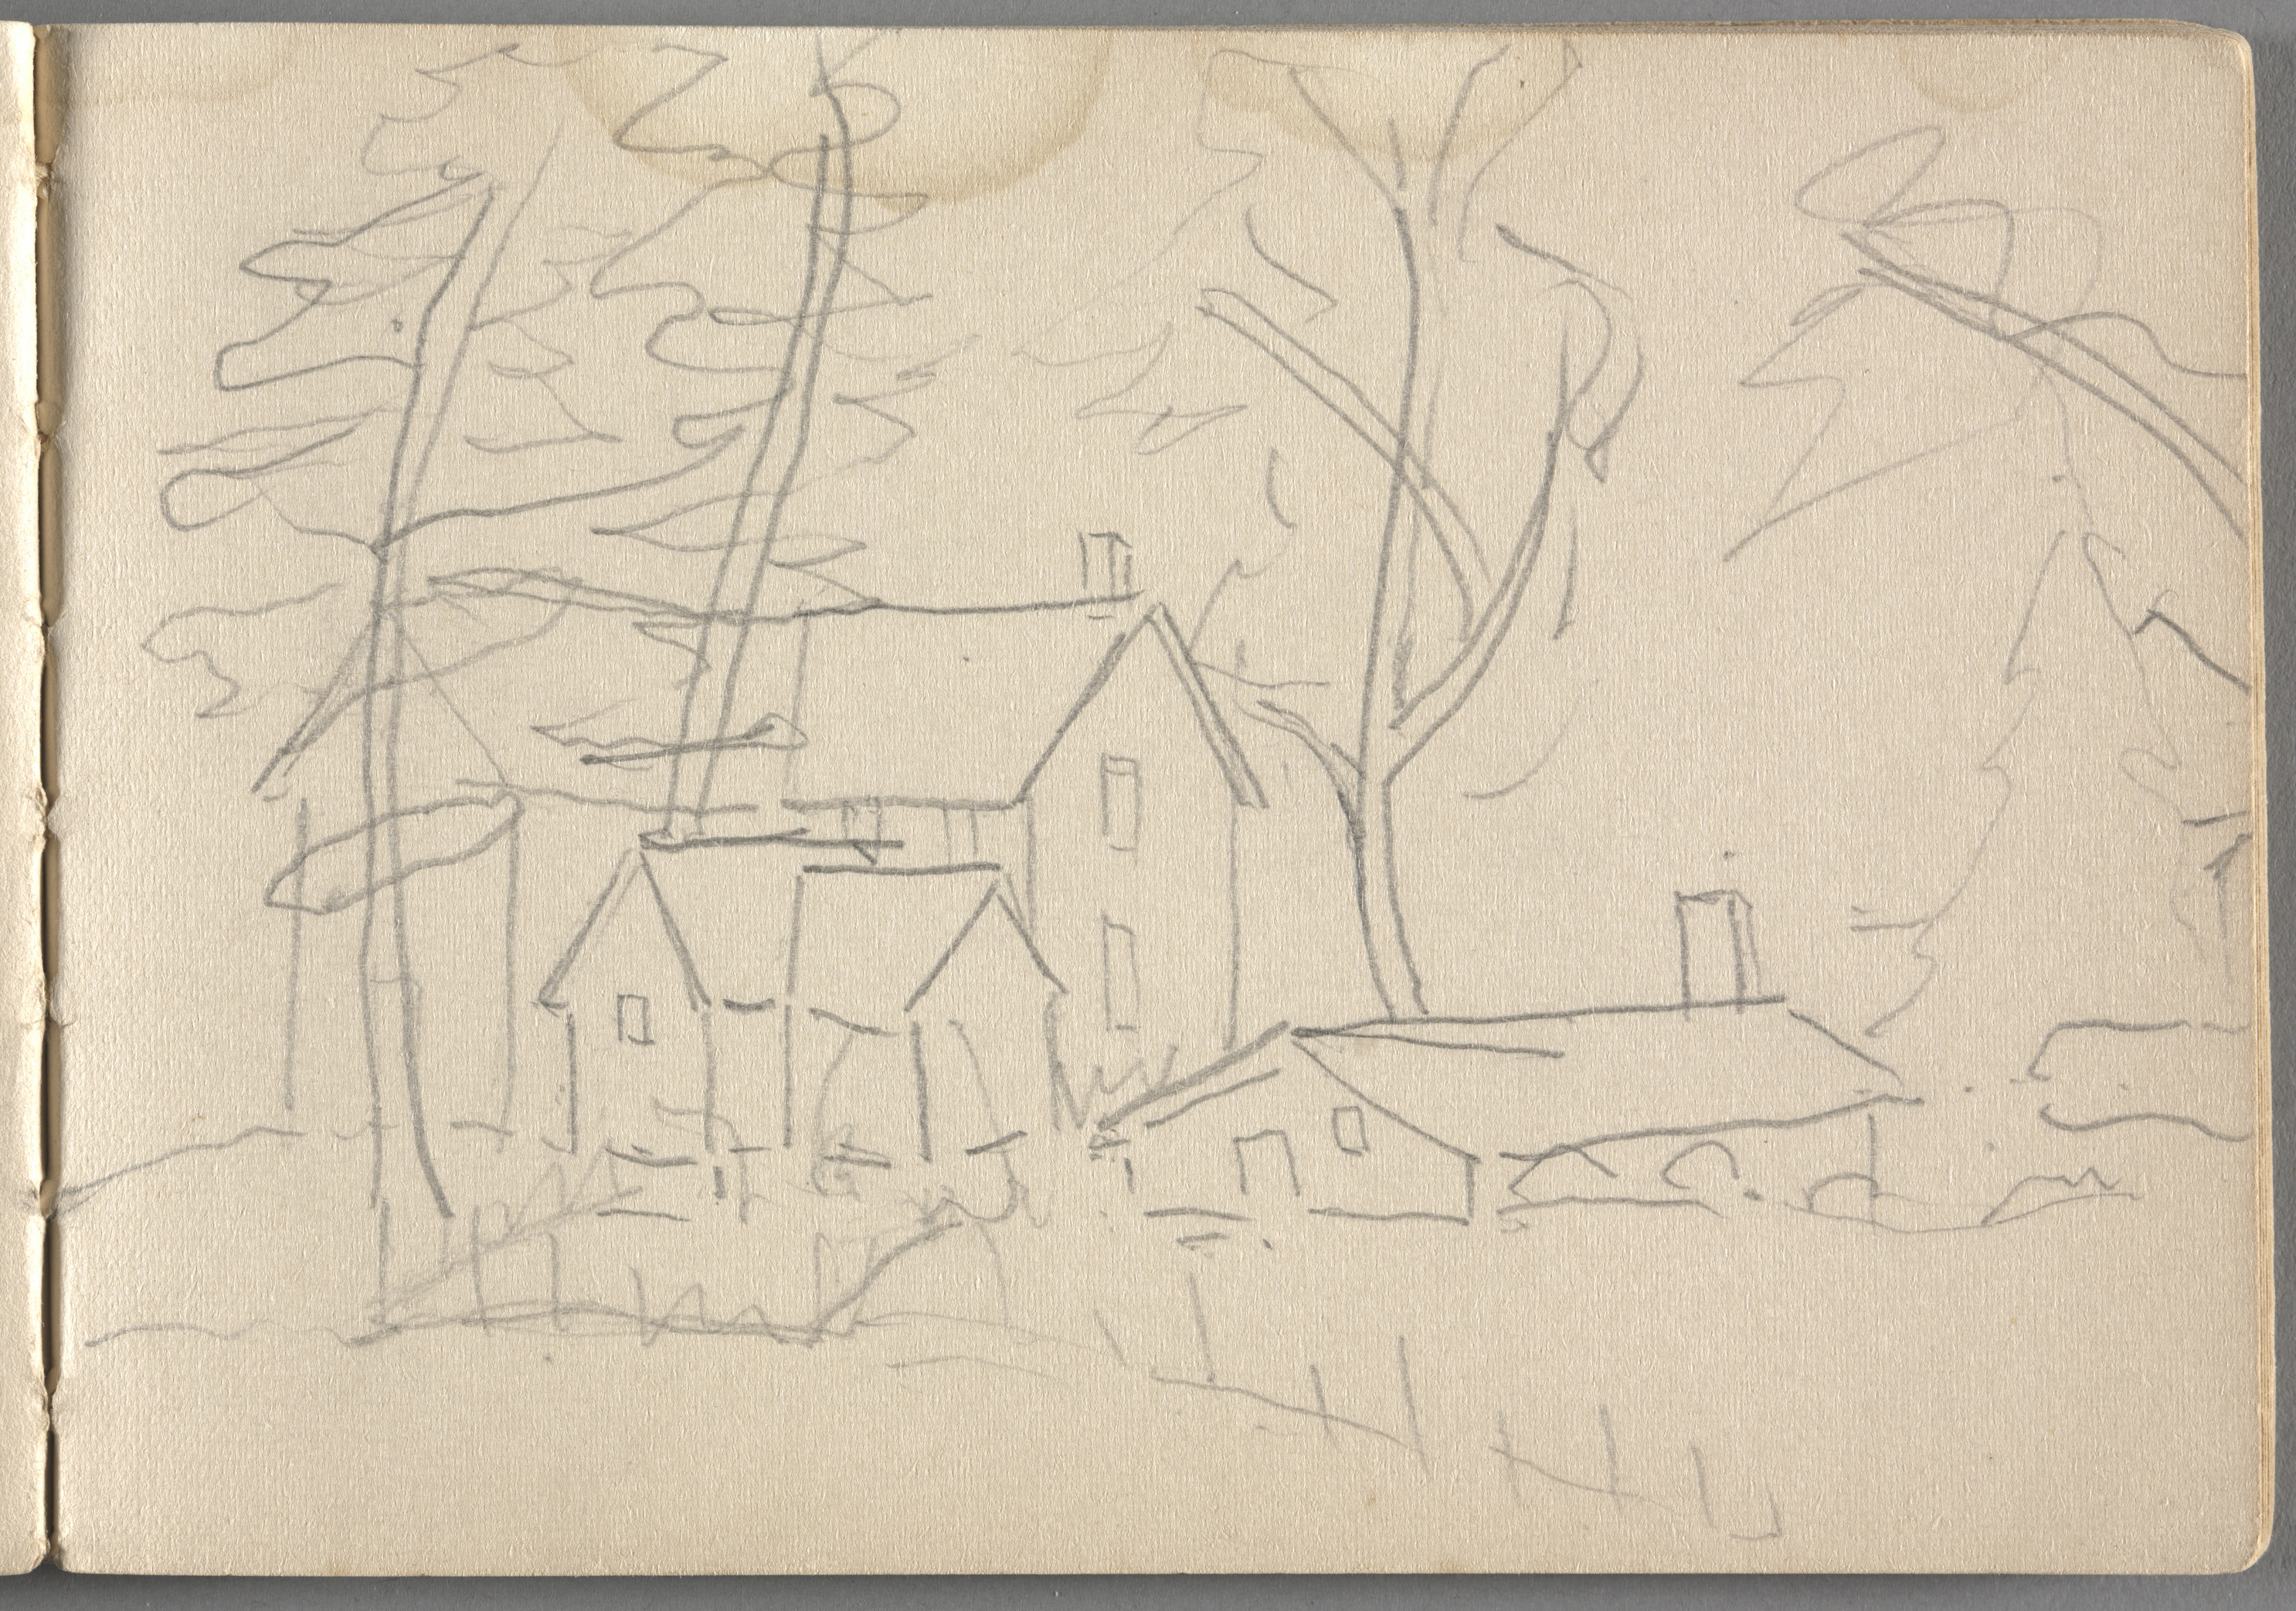 Sketchbook No. 4, page 7: Pencil sketch of houses, trees 